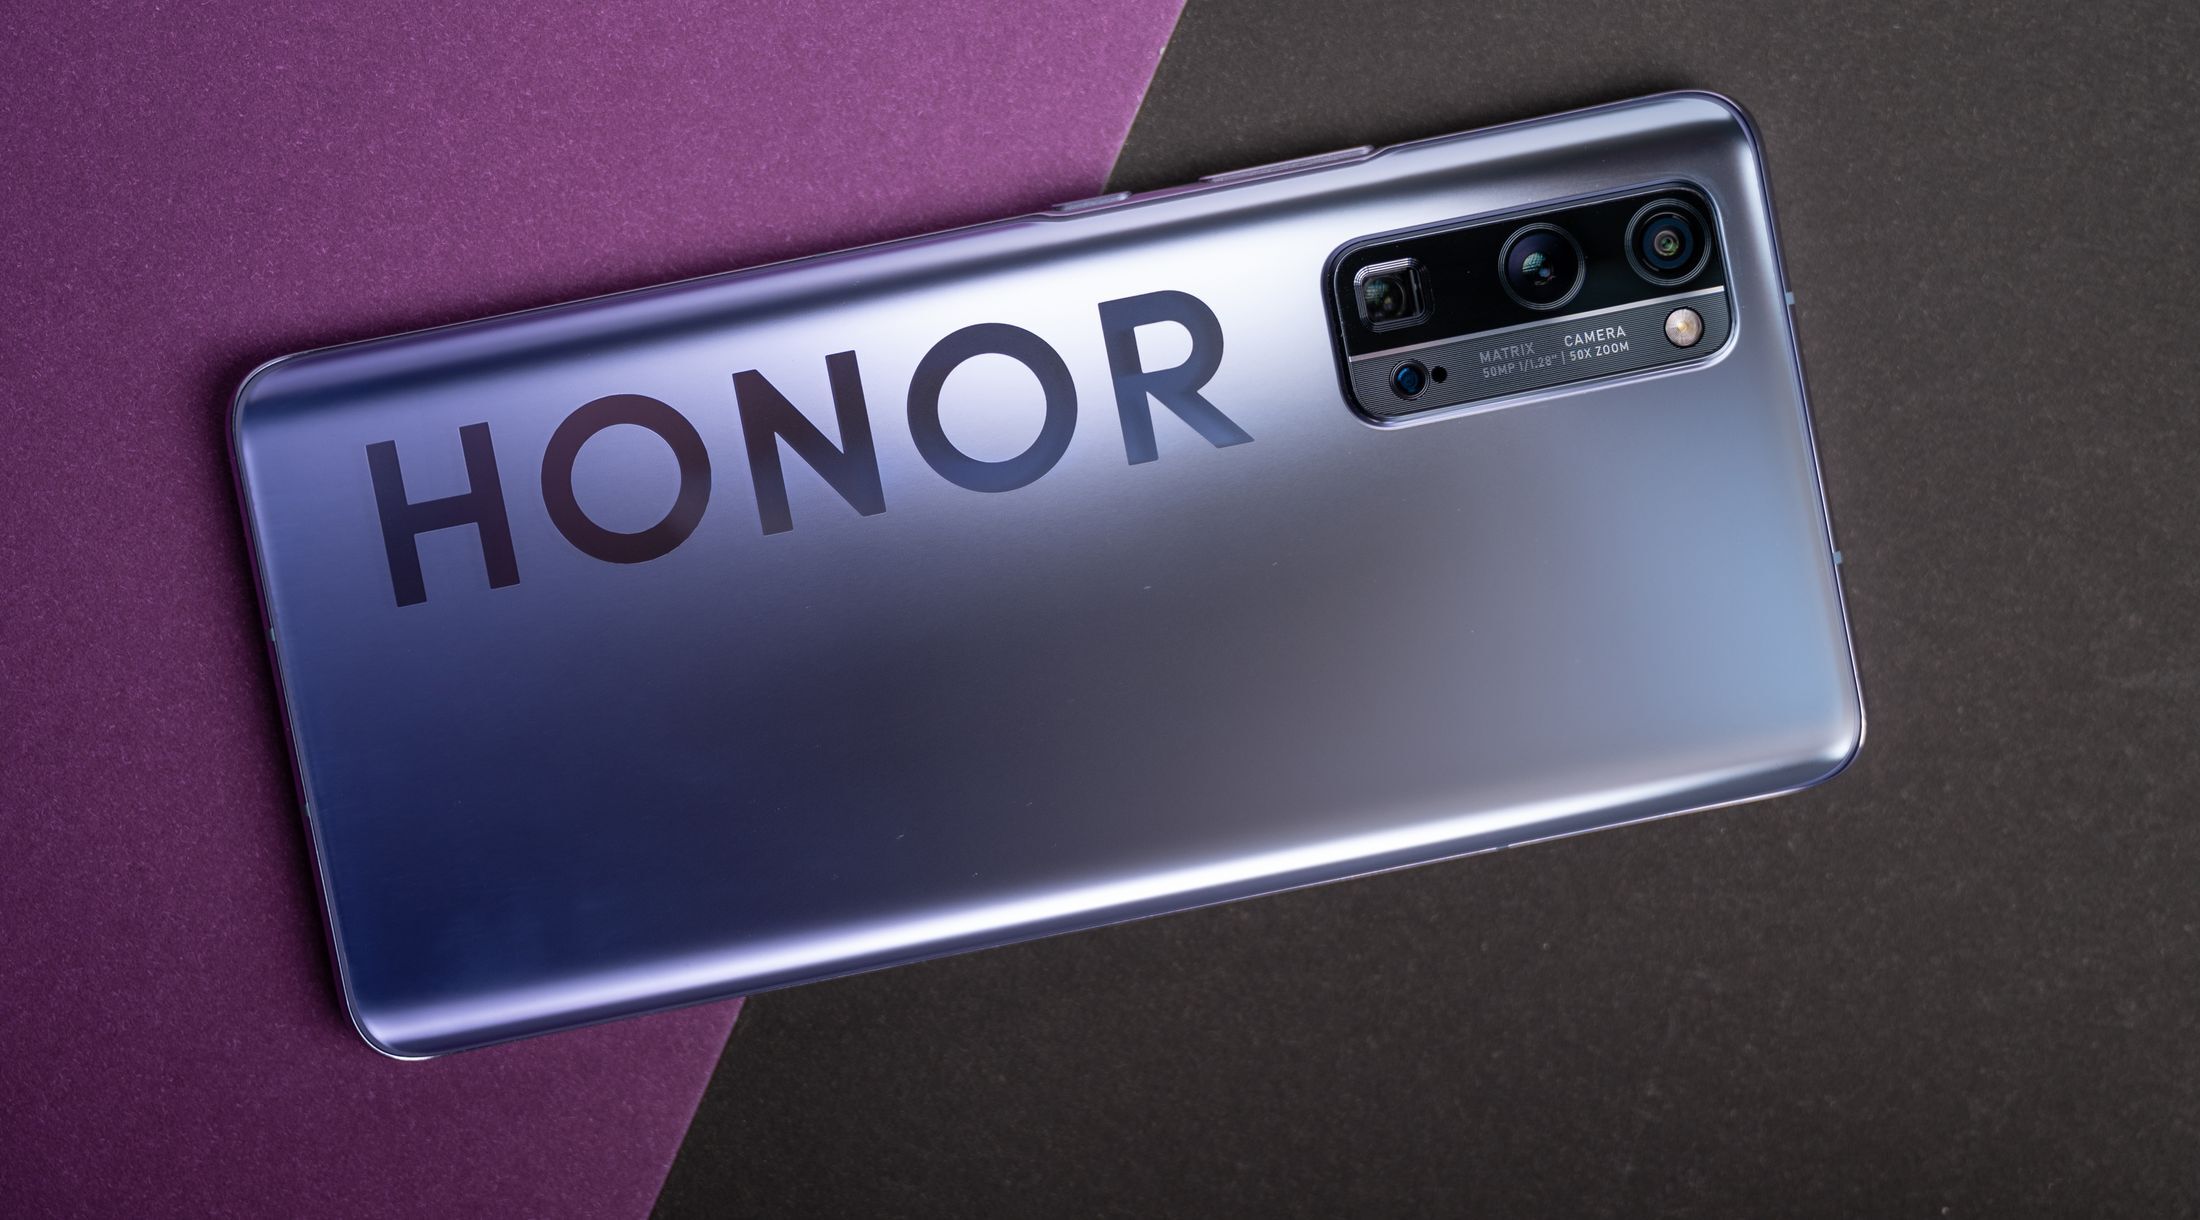   honor      android 